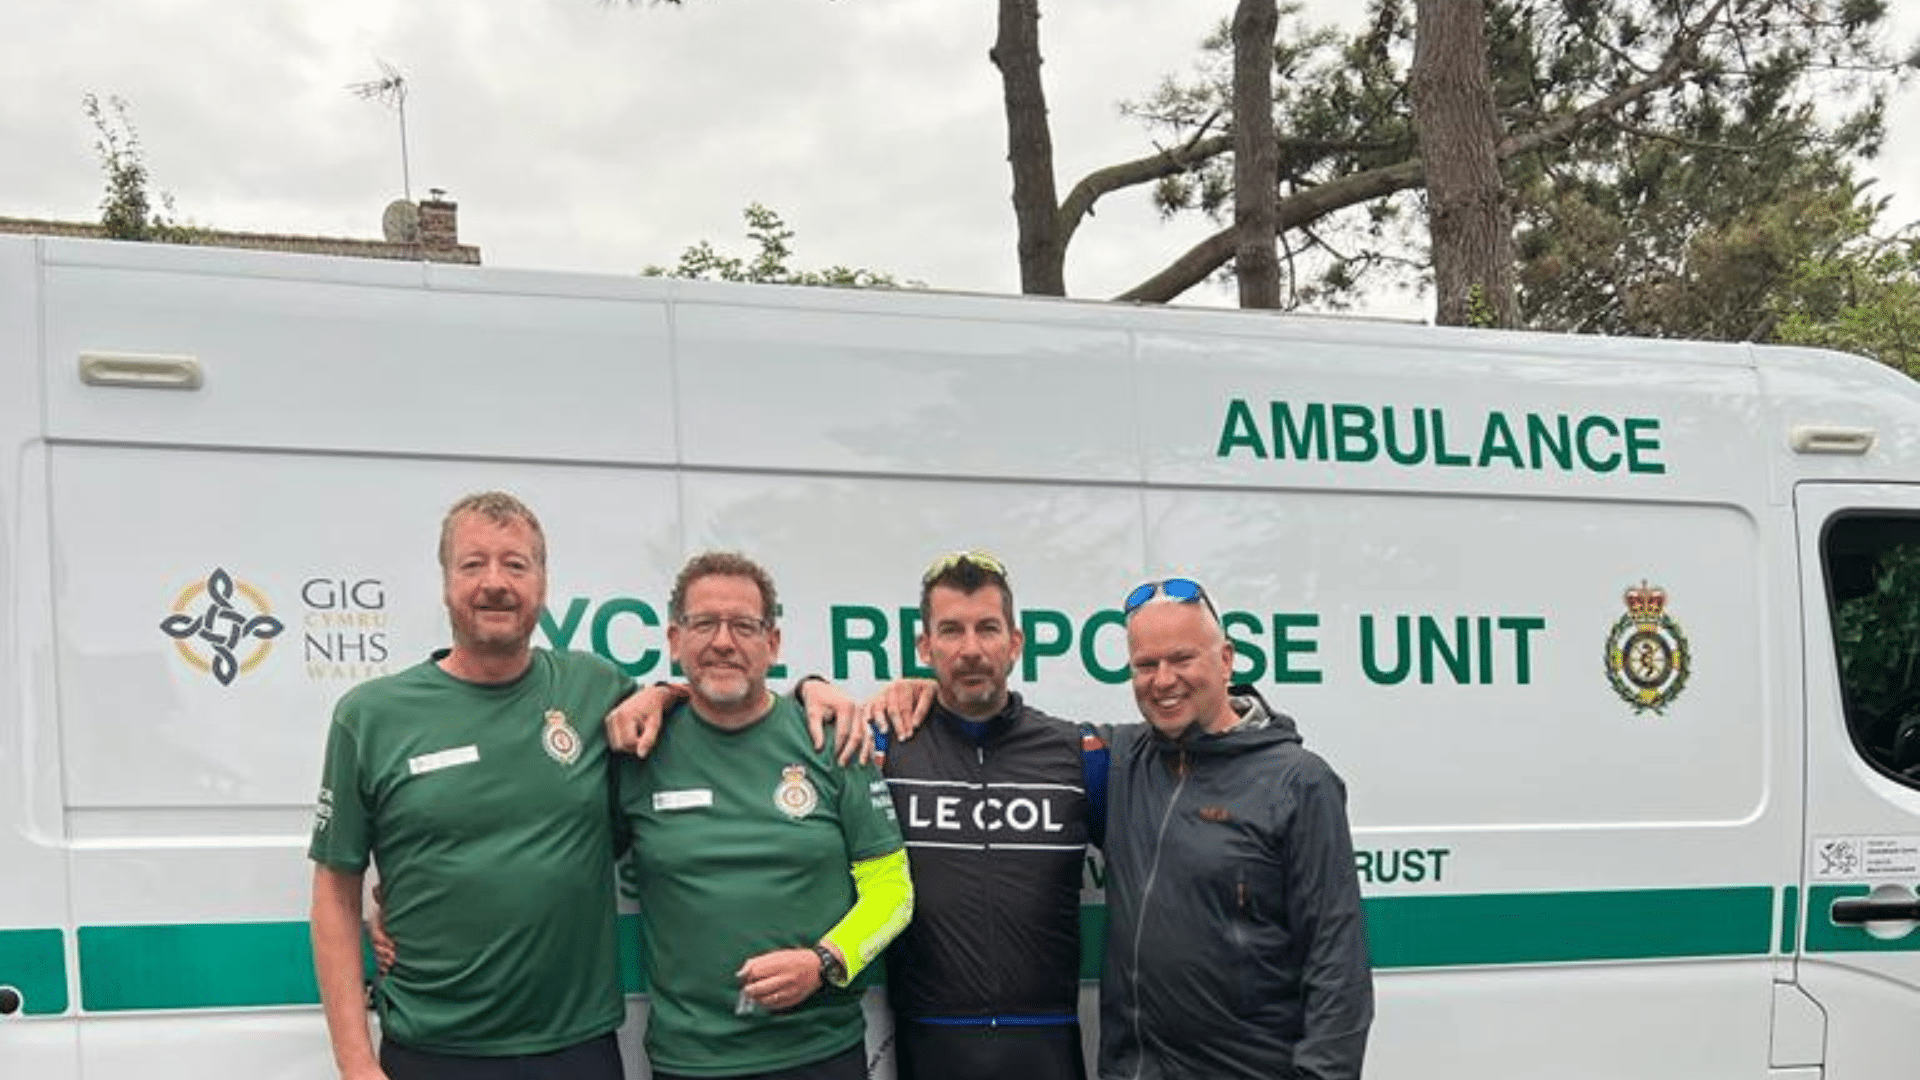 The Welsh Ambulance Service supports Woody’s Lodge